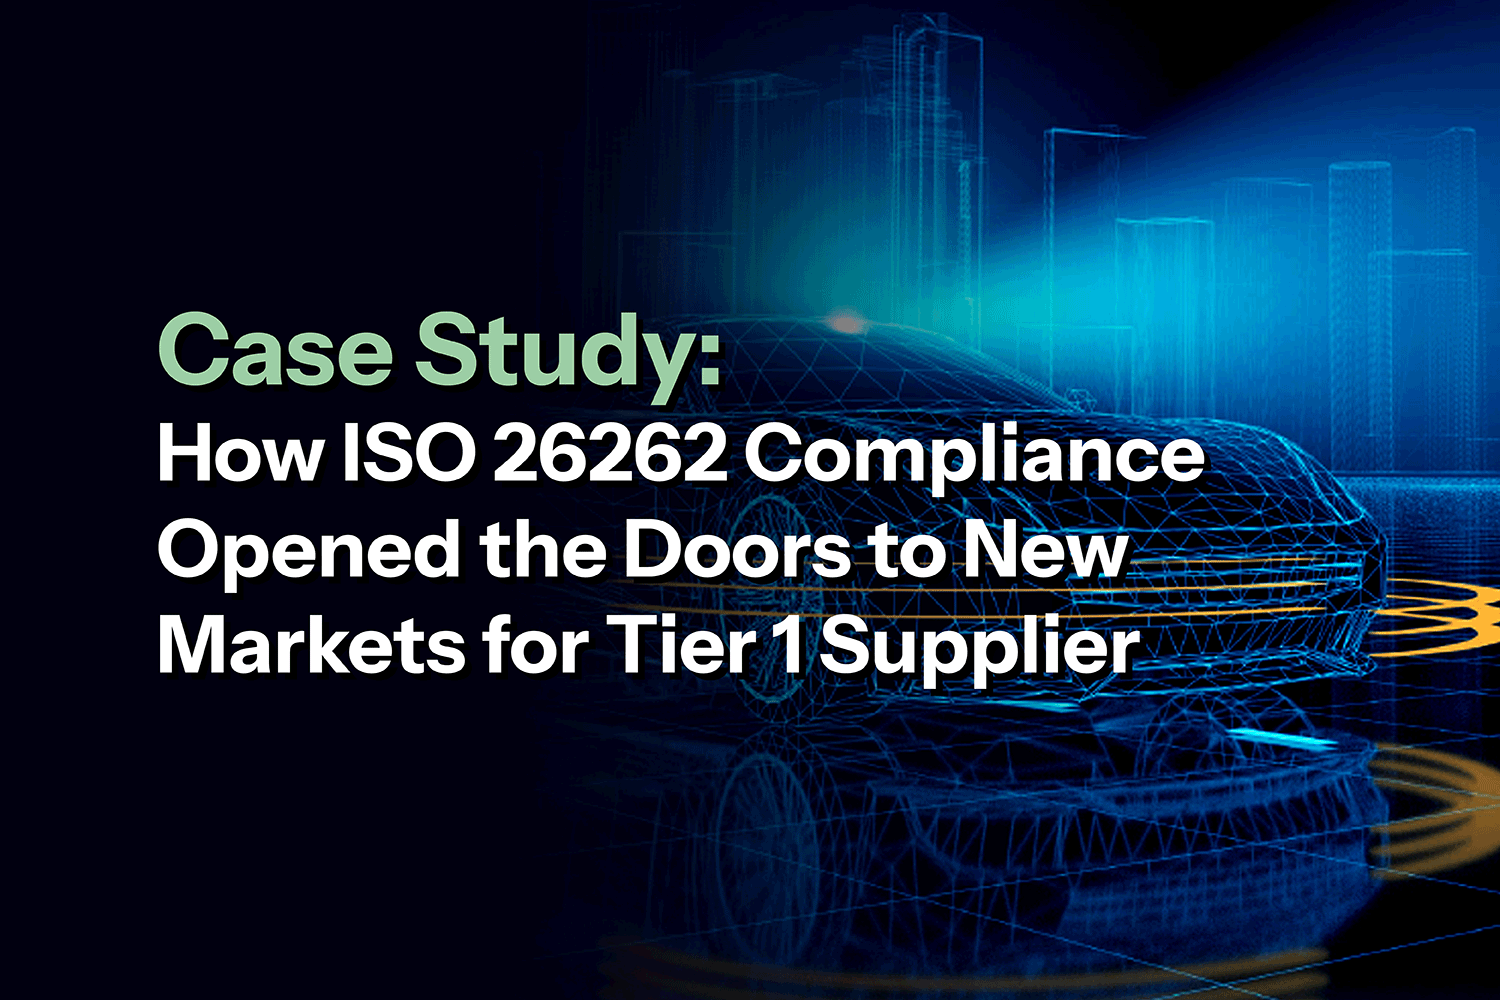 LSS-Knowledge-Center-Case-Study-How ISO 26262 Compliance(...)-Card-Images-01